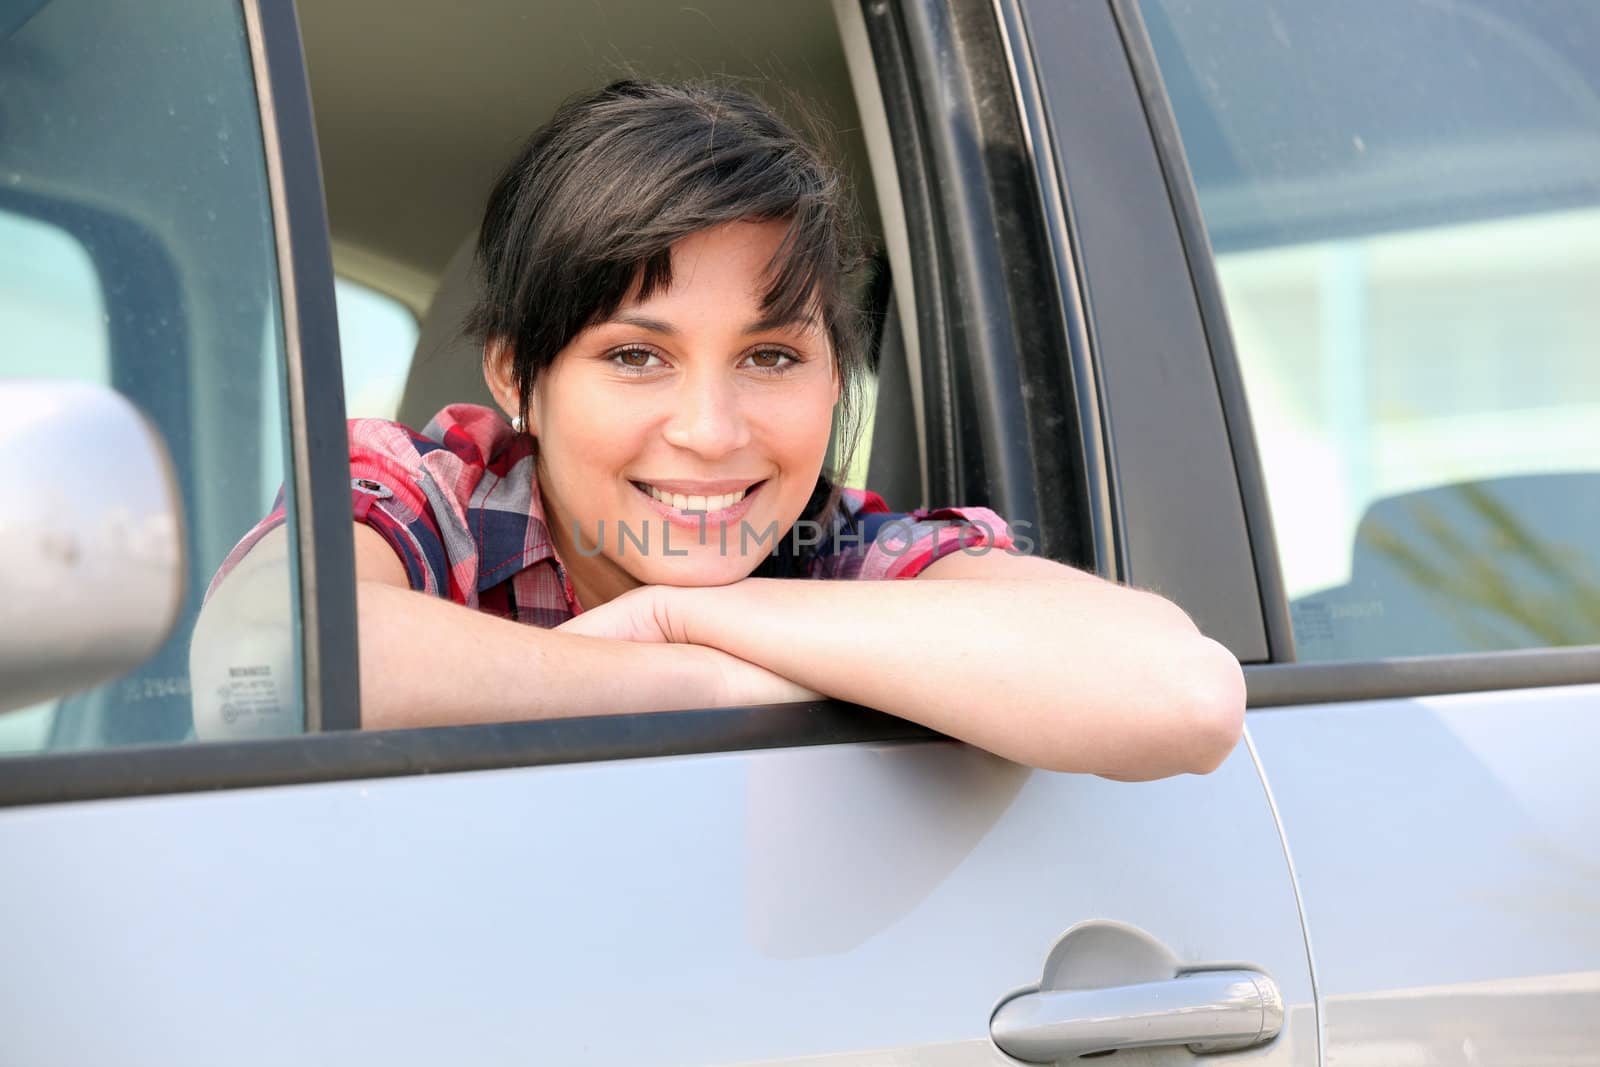 Young woman leaning out of the window of a car